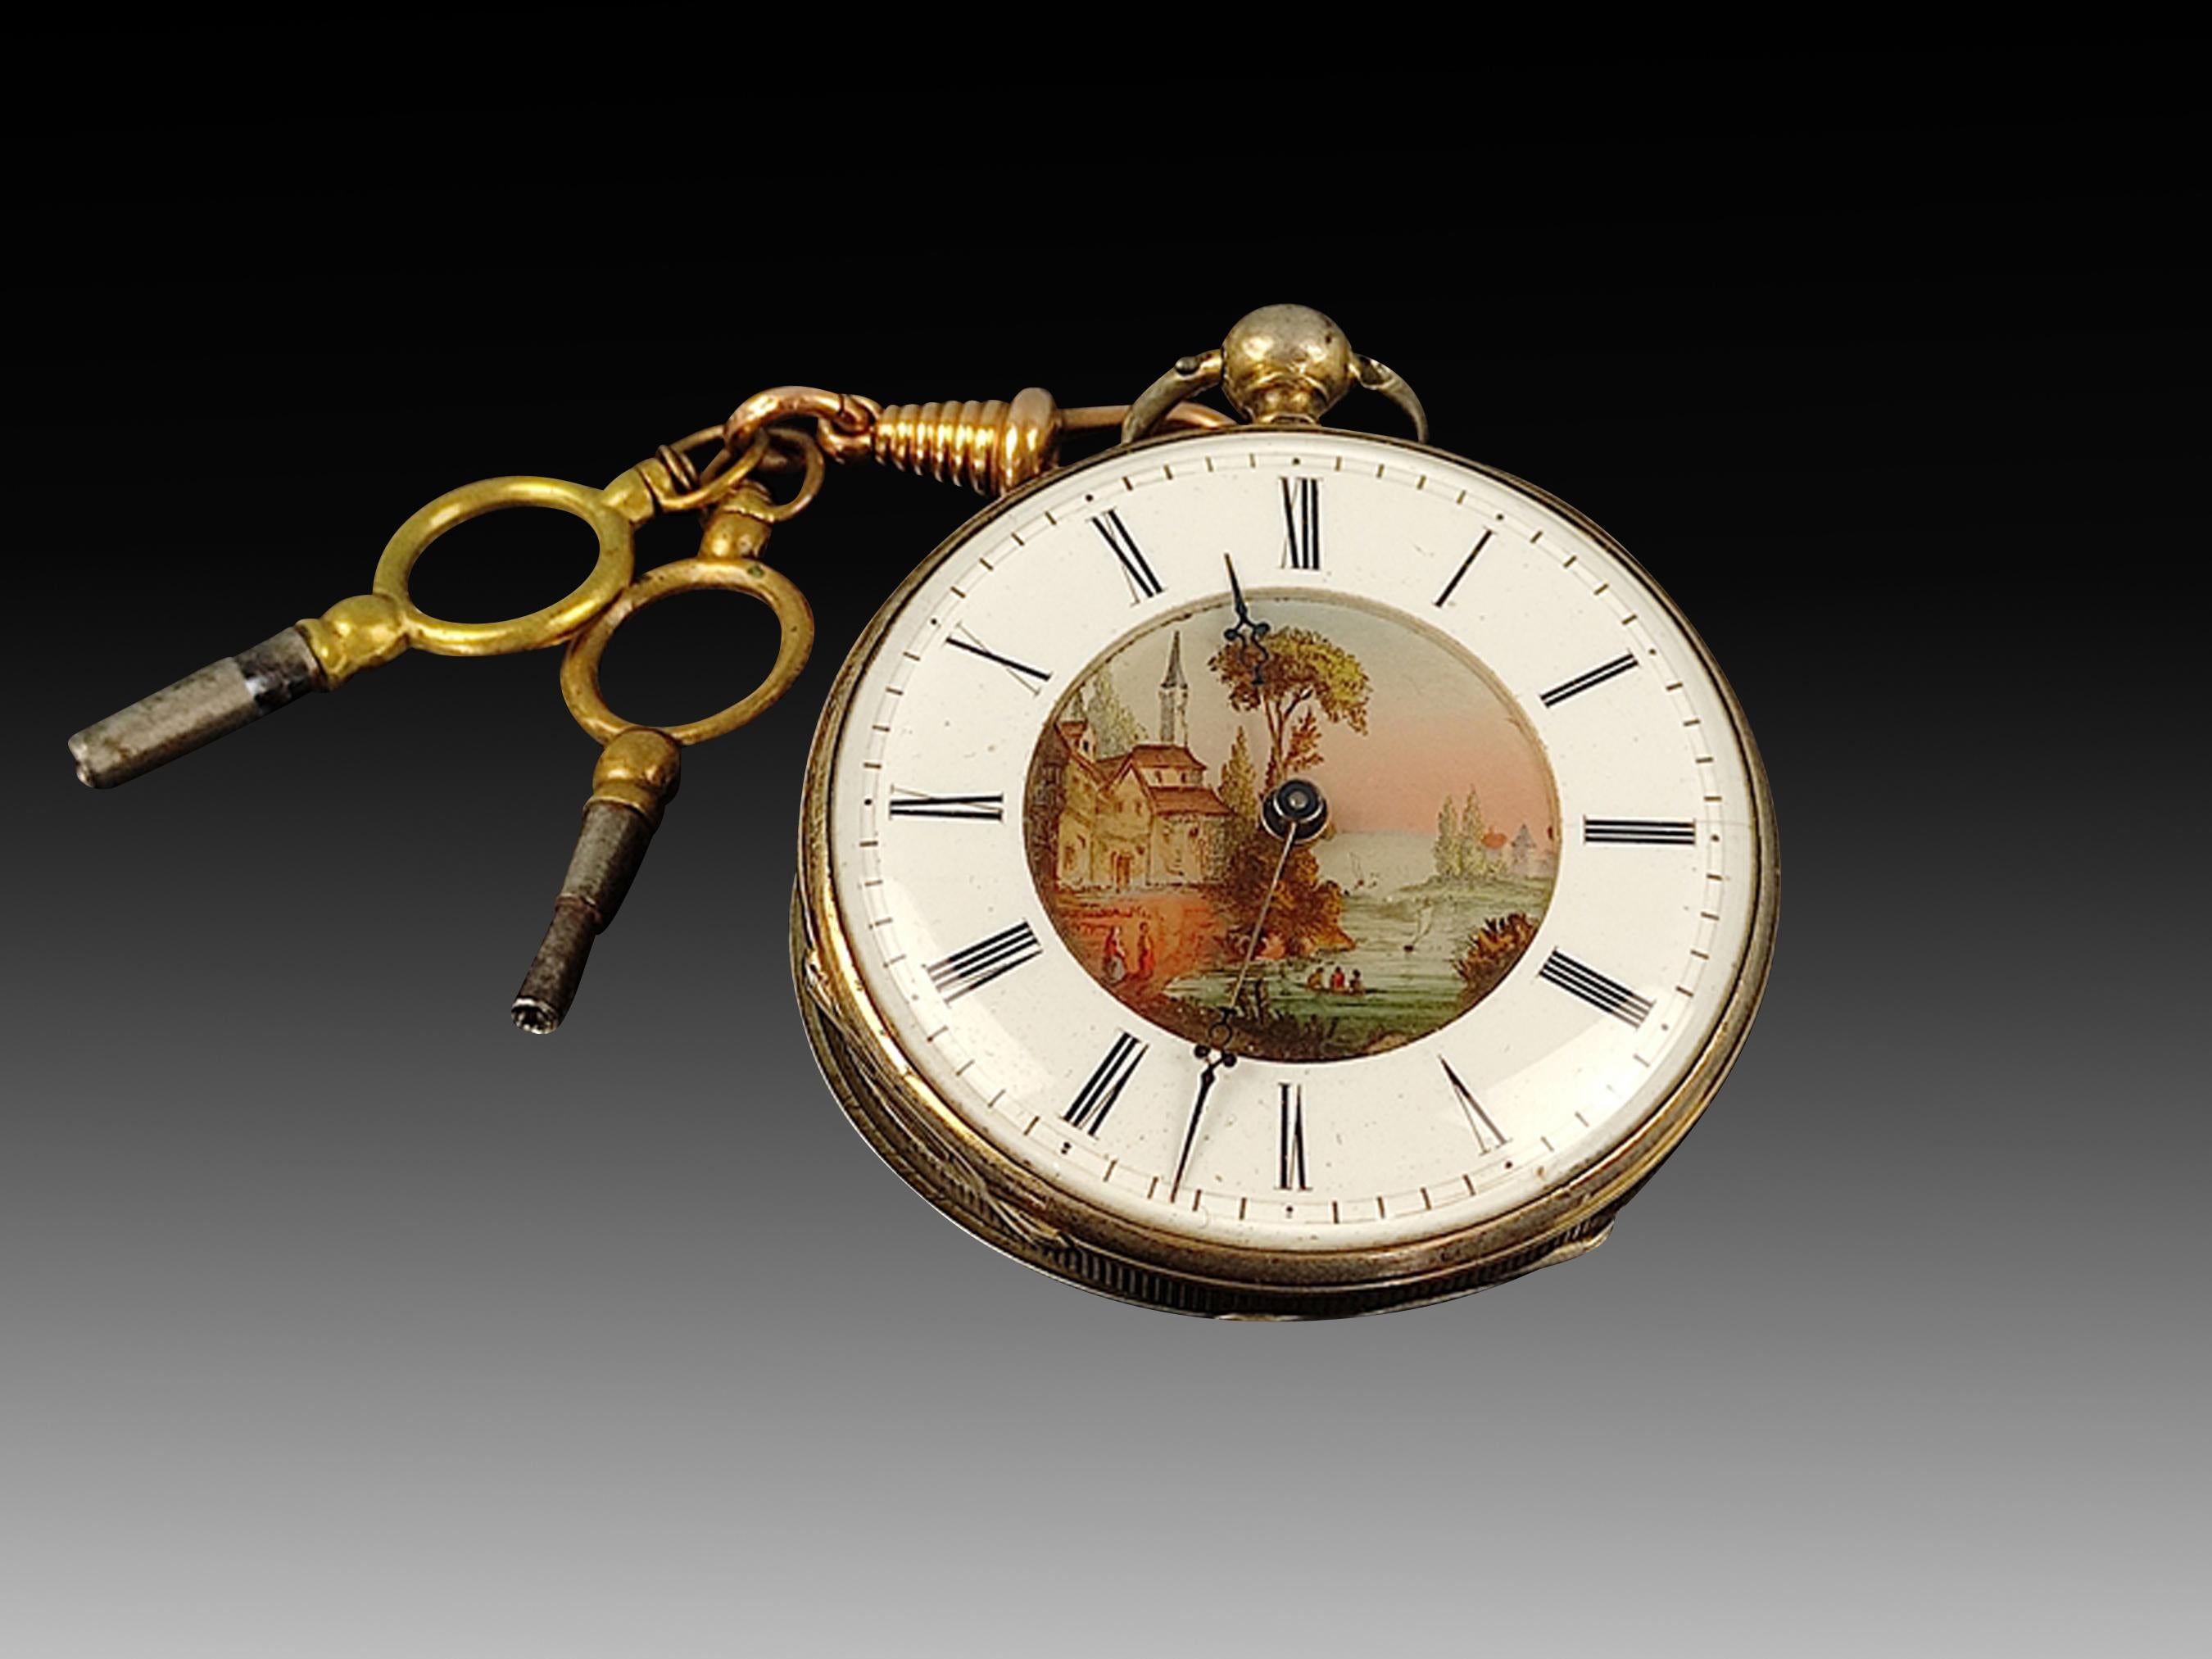 Rare Antique Pocket Key Watch French 1800s with Painted Enamel Dial in Working Order

An exceptional example of French craftwork estimated from the mid-1800s with delicate enamel painting on the dial and bespoke Roman numerals. 
 
Pocket watches